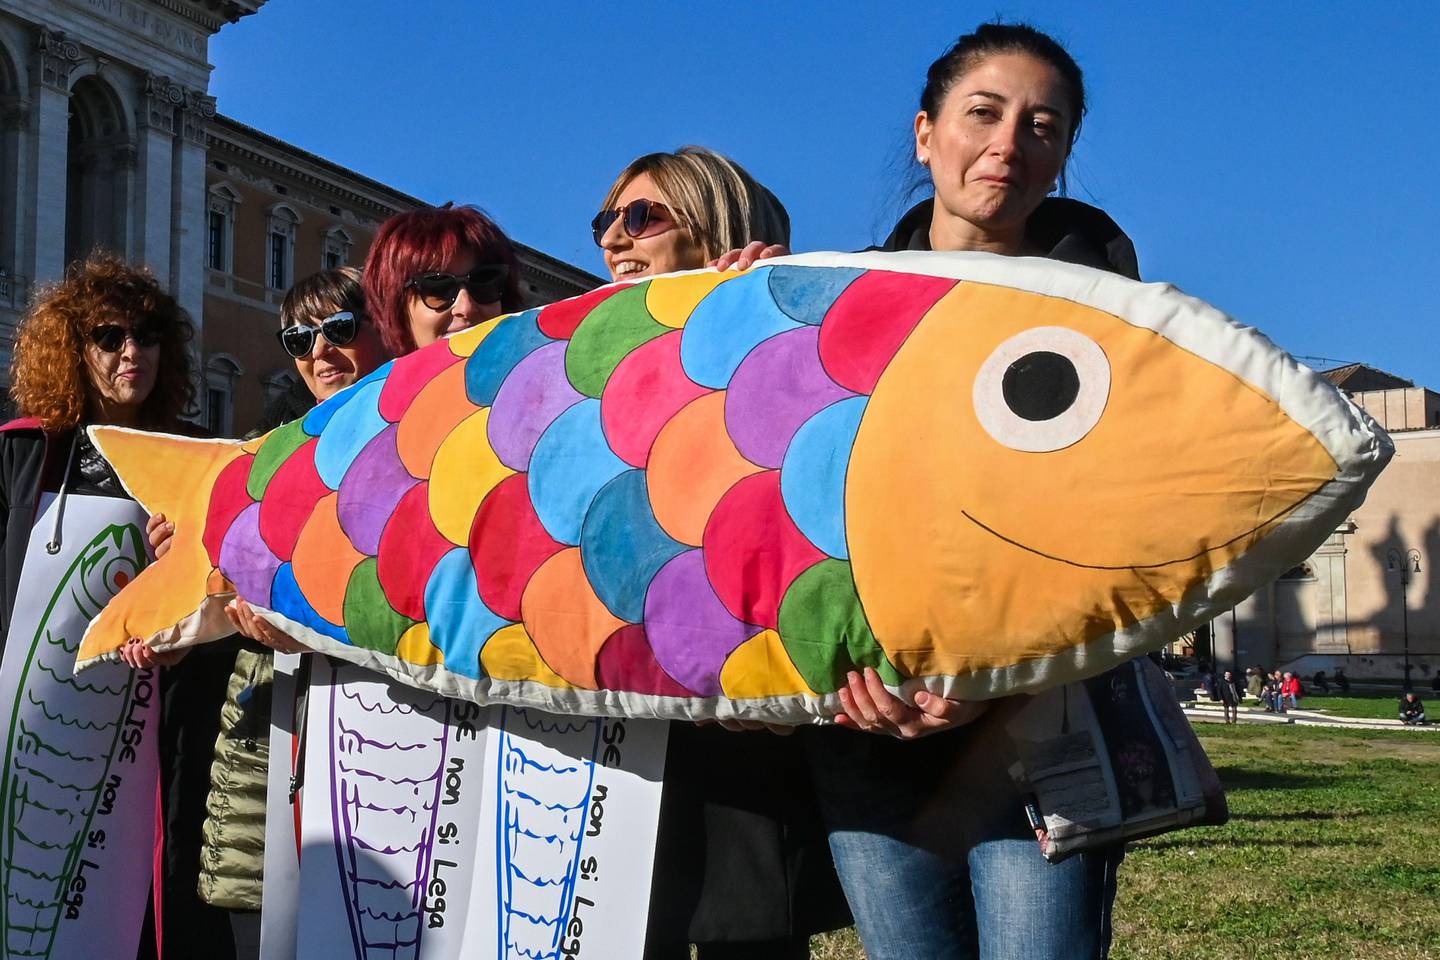 Woman holding several drawings of sardines and a giant sardine-shaped stuffed cushion take part in a demonstration of the "Sardine Movement", formed to oppose the far-right League party, on December 14, 2019 by the Basilica San Giovanni in Laterano in Rome. - Italy's youth-driven "Sardine Movement", formed to oppose the far-right League party, was launched by four little-known youths saying the anti-immigration League party led by Matteo Salvini represents hate and exclusion. The sardine has become a symbol of protest against Salvini, a former interior minister. (Photo by ANDREAS SOLARO / AFP)